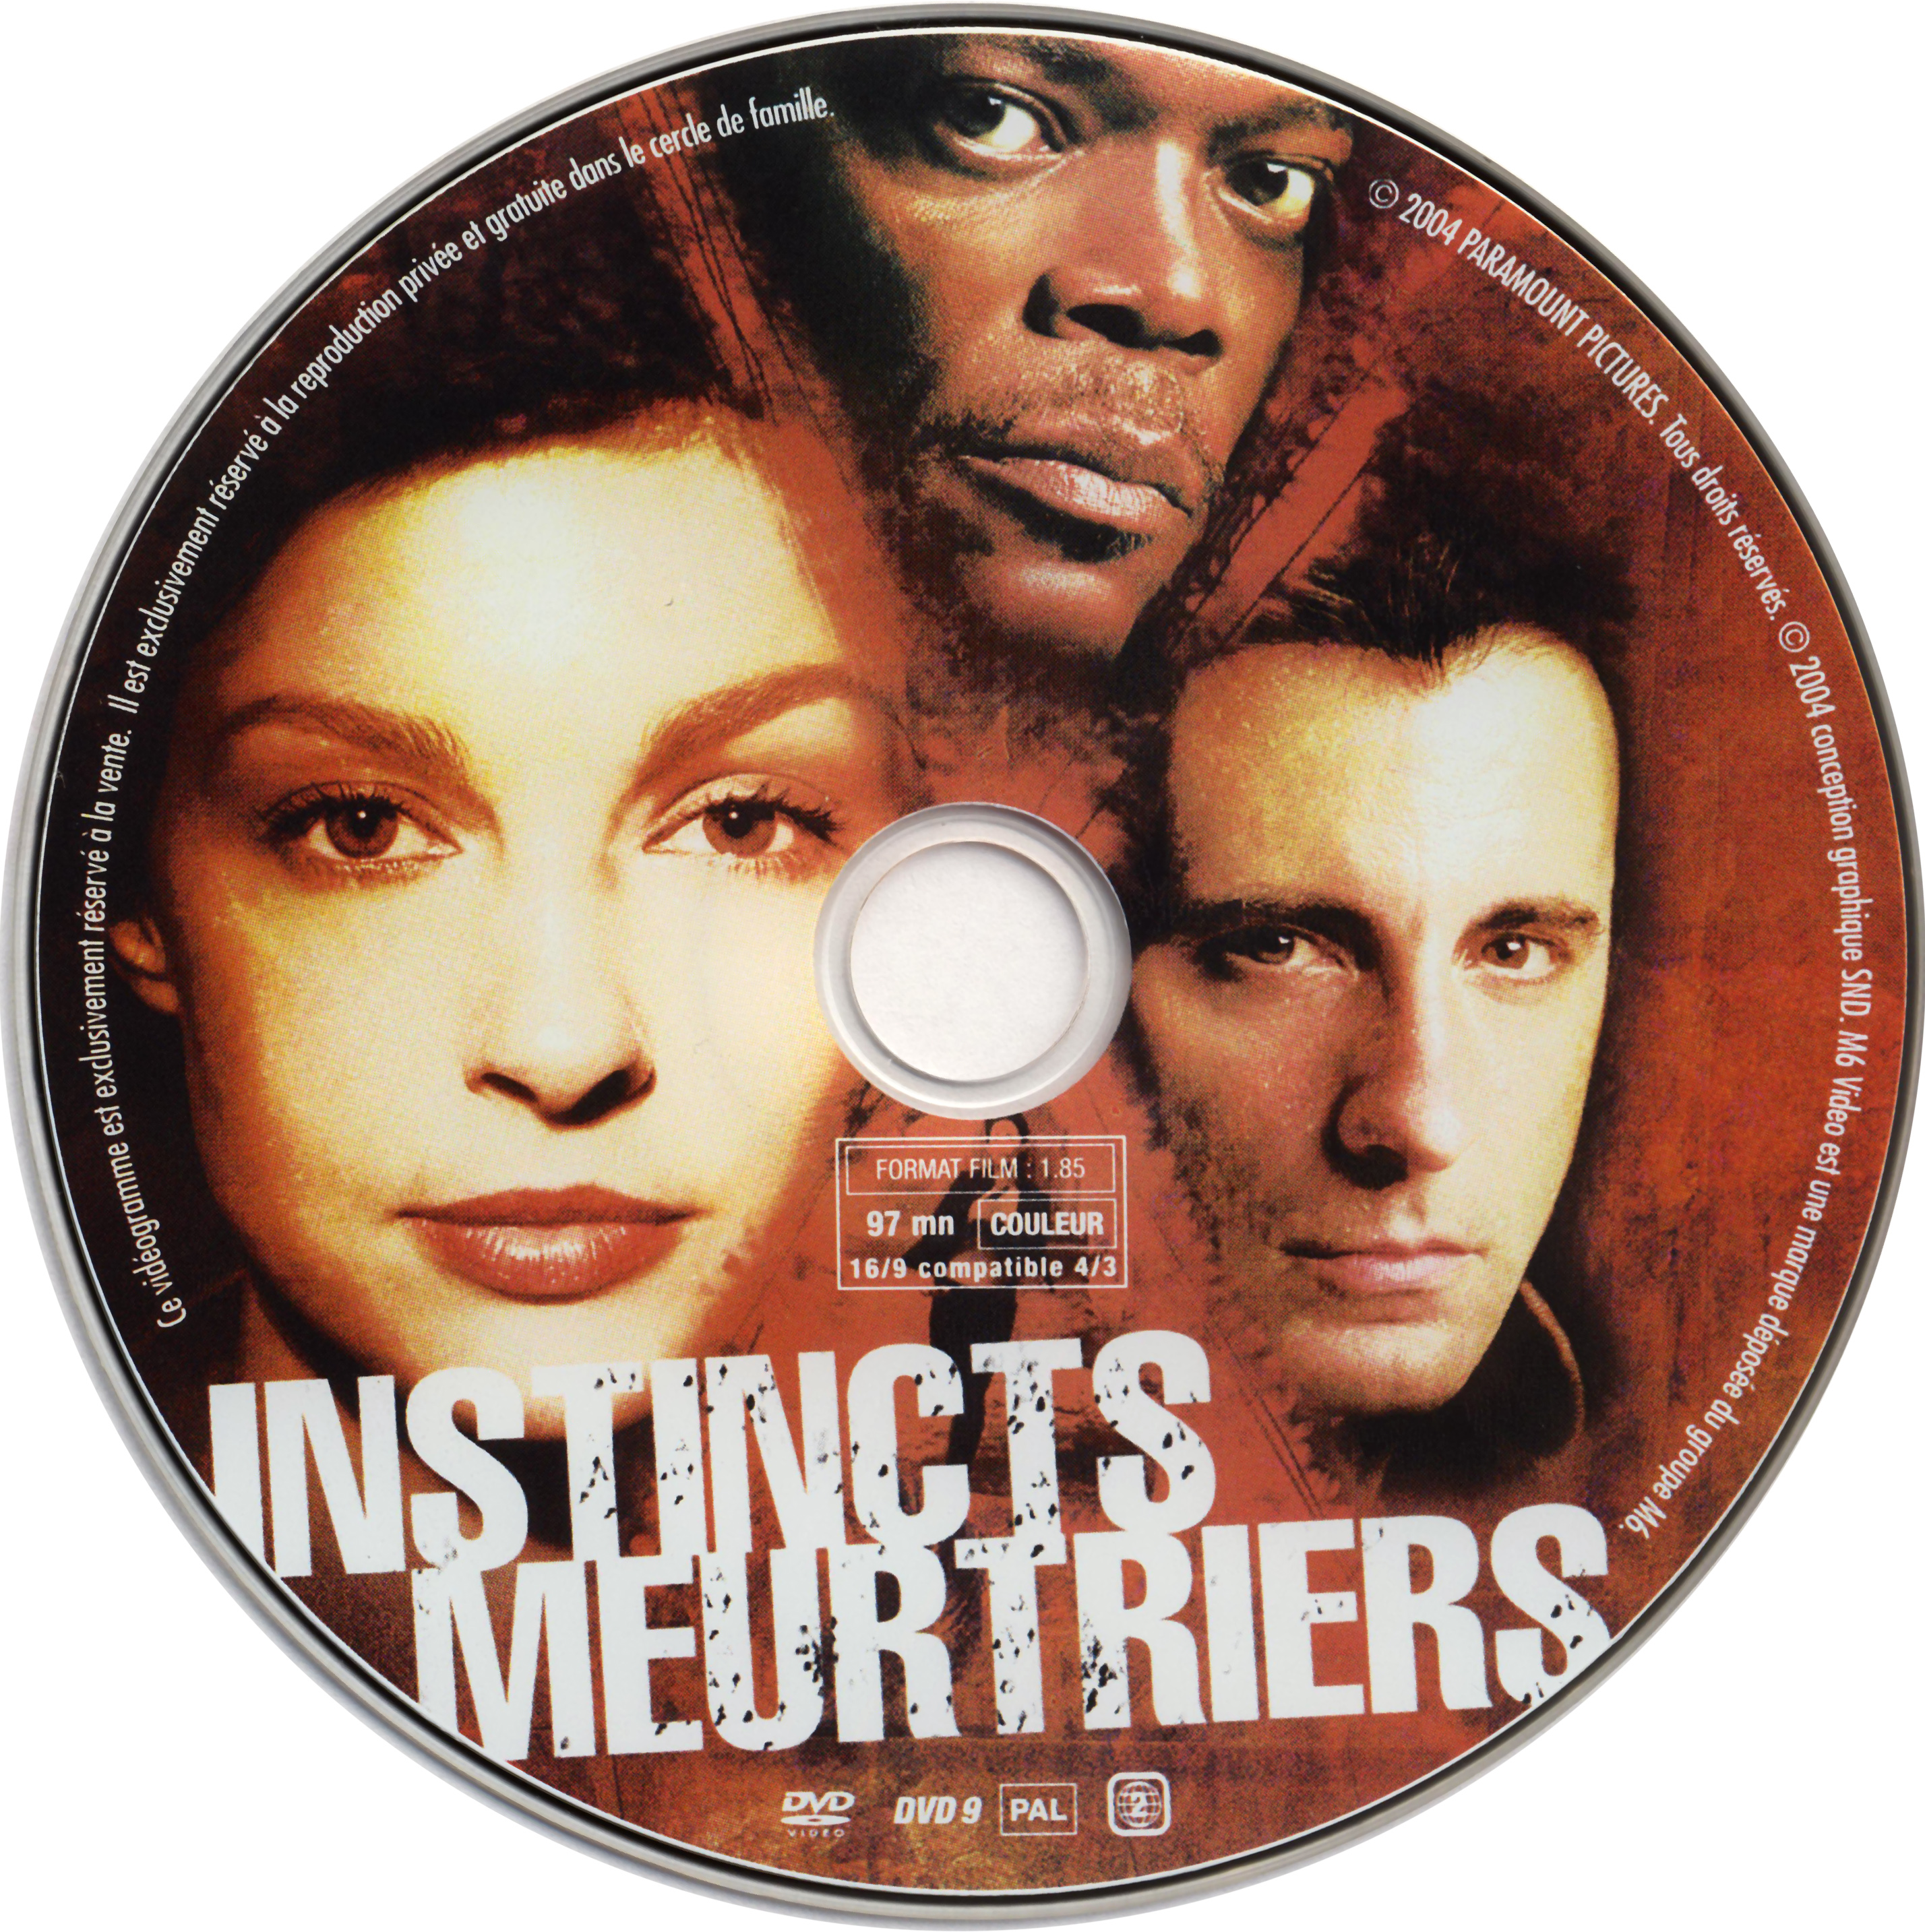 Instincts meurtriers